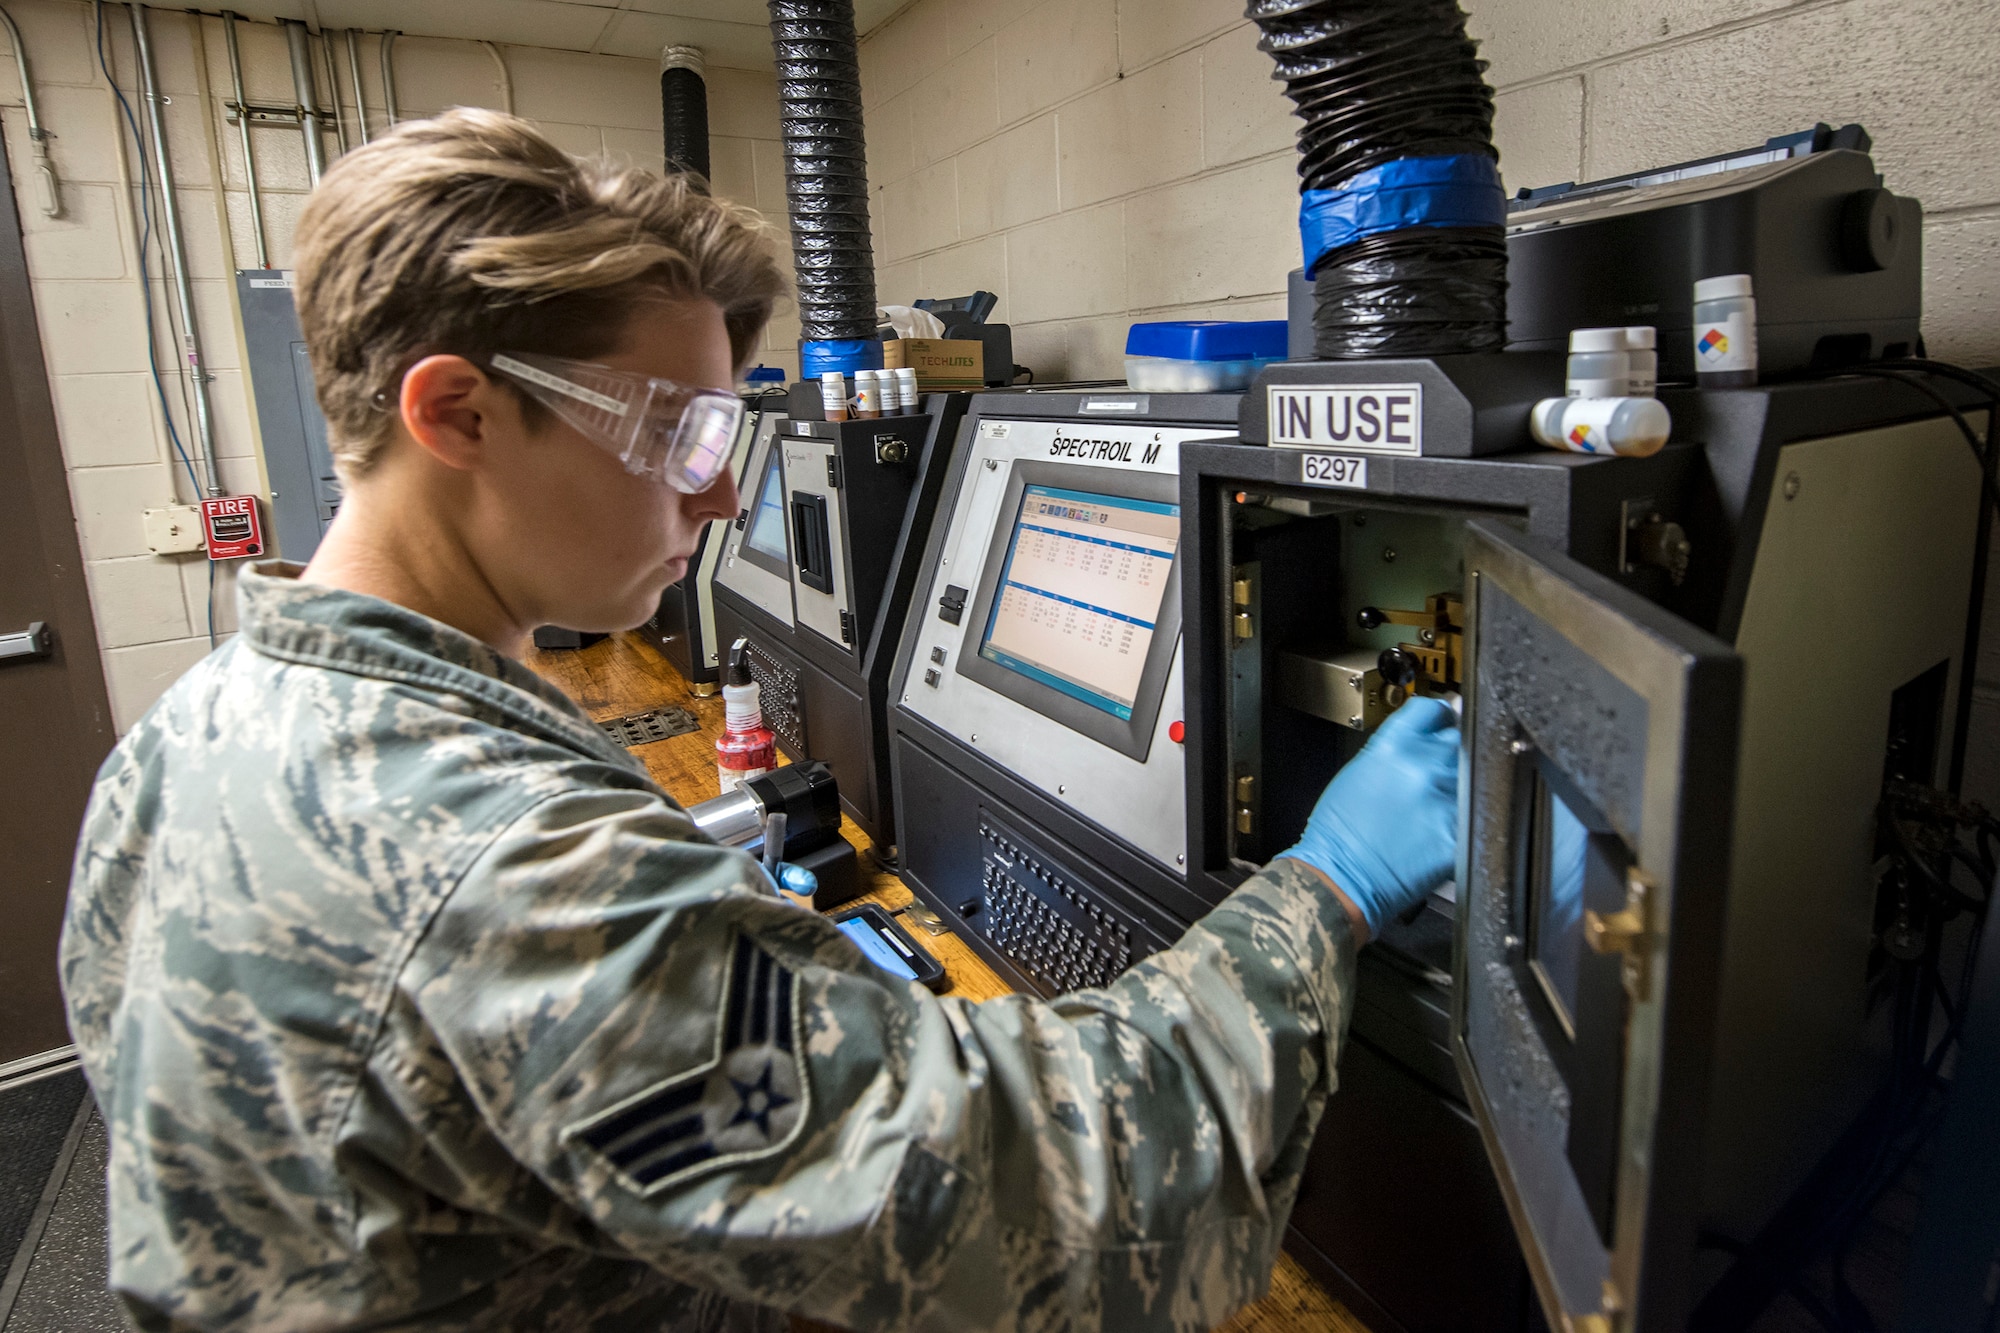 Senior Airman Louisa Doyle, 23d Maintenance Squadron non-destructive inspection (NDI) specialist, places an oil sample inside of a joint oil analysis program machine, May 2, 2018, at Moody Air Force Base, Ga. NDI technicians use various methods to complete these inspections such as X-ray, florescent dye penetrant, oil analysis and ultrasonic scanning to examine and inspect numerous aircraft parts and components to ensure that they are in usable condition. (U.S. Air Force photo by Airman 1st Class Eugene Oliver)